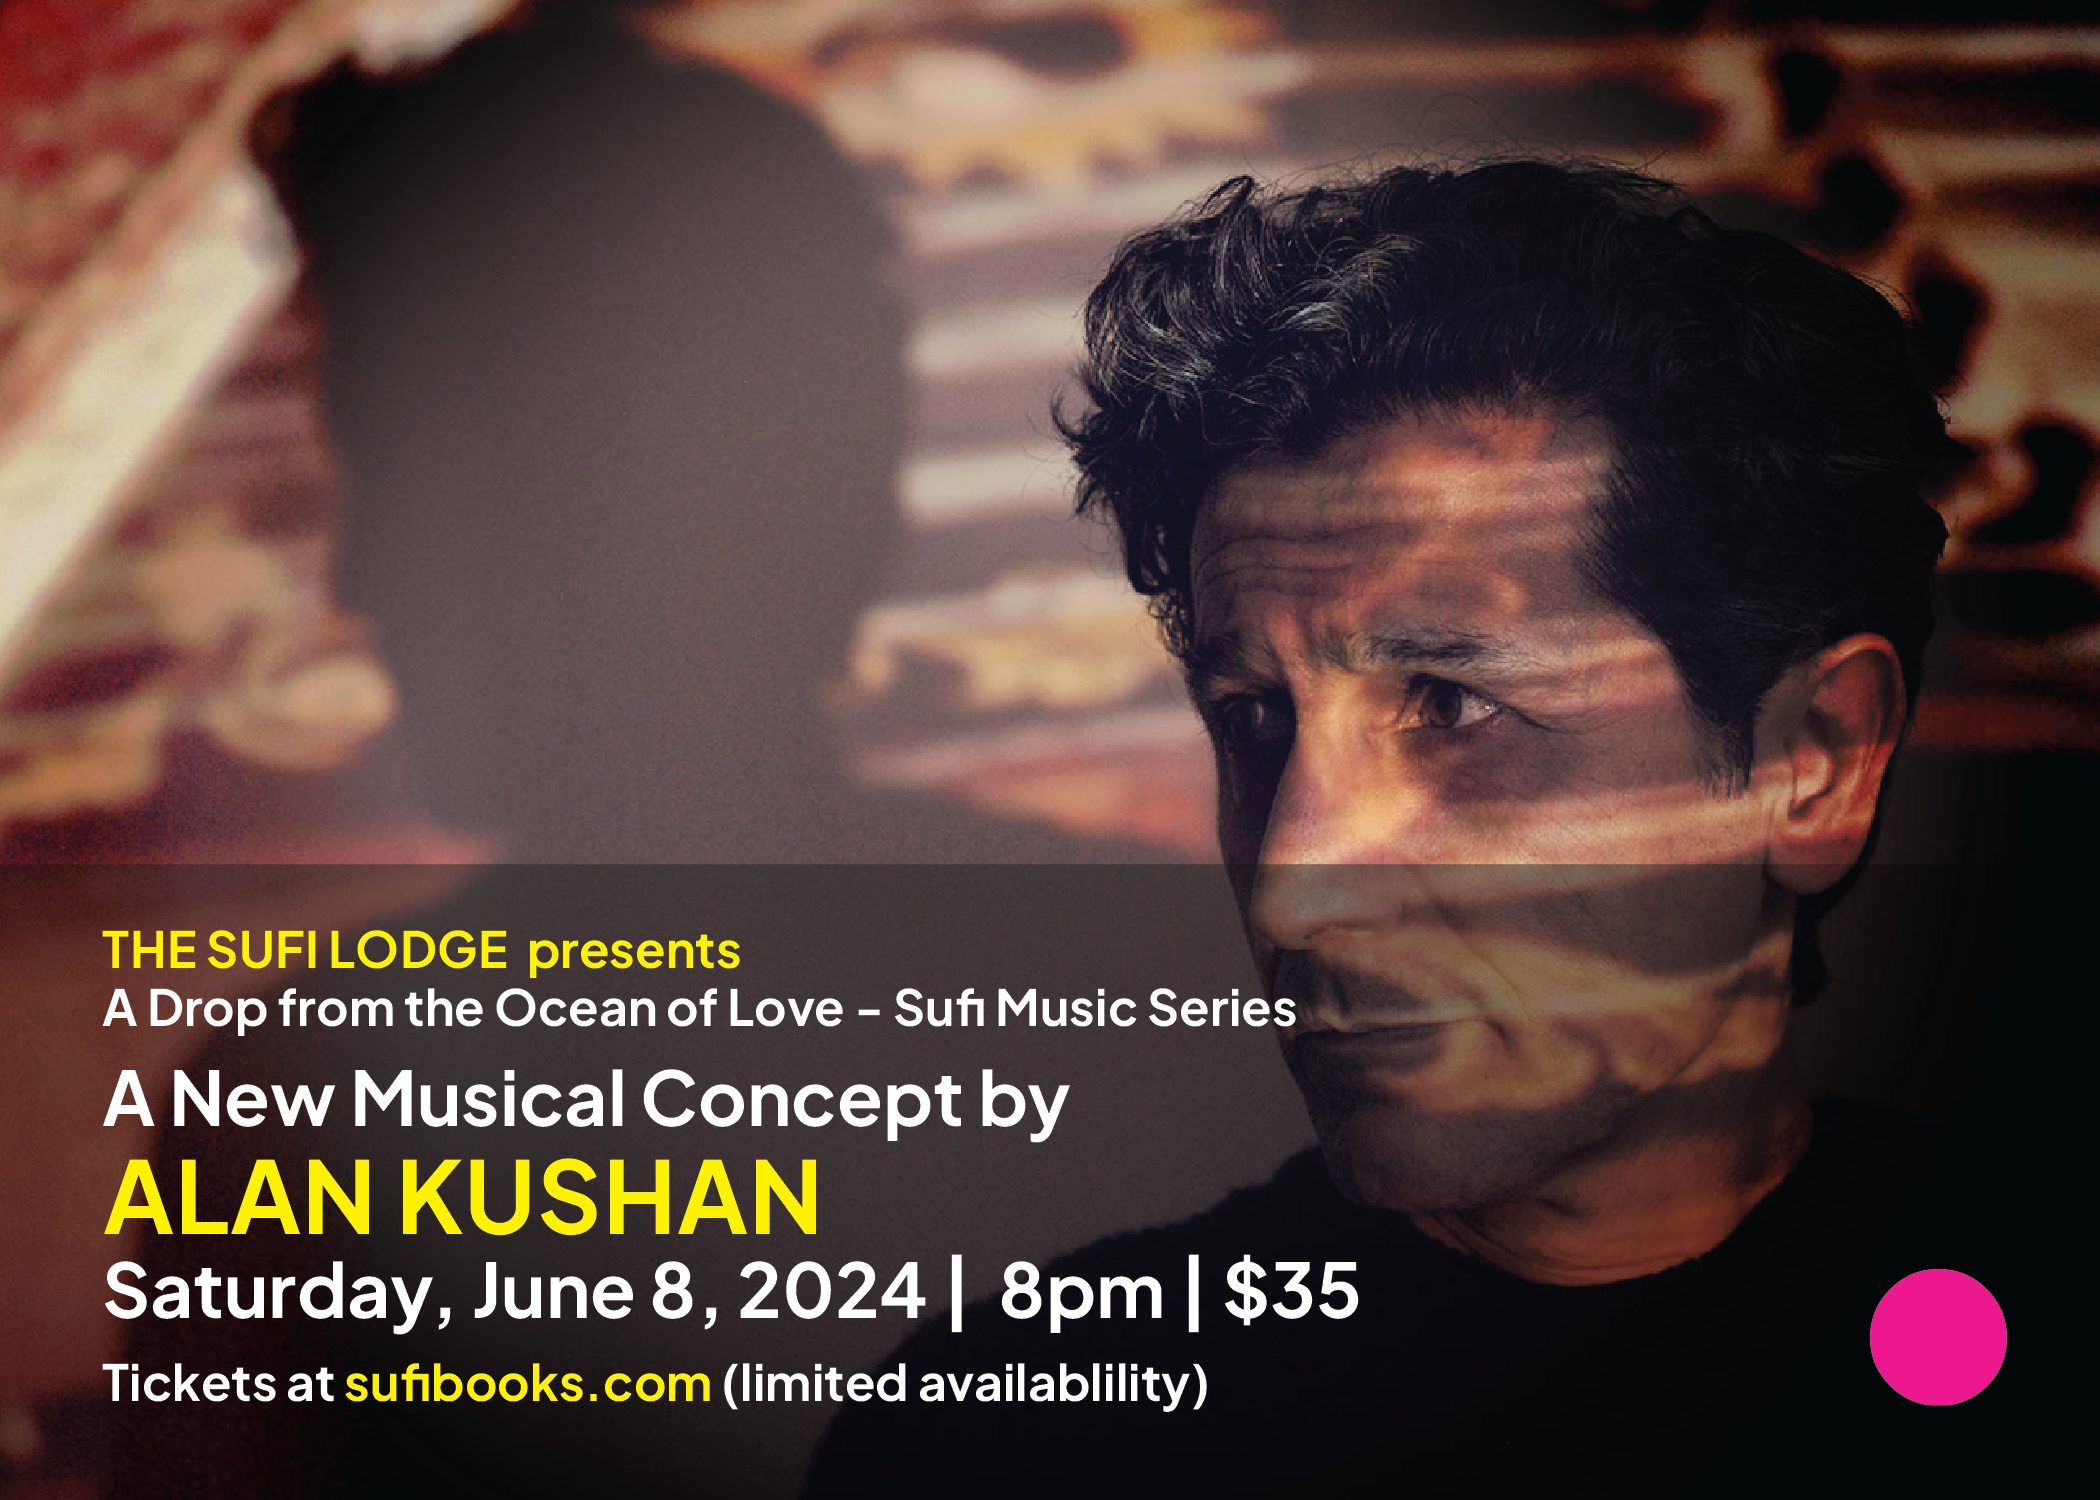 Saturday, June 8, 2024 | A New Musical Concept by Alan Kushan